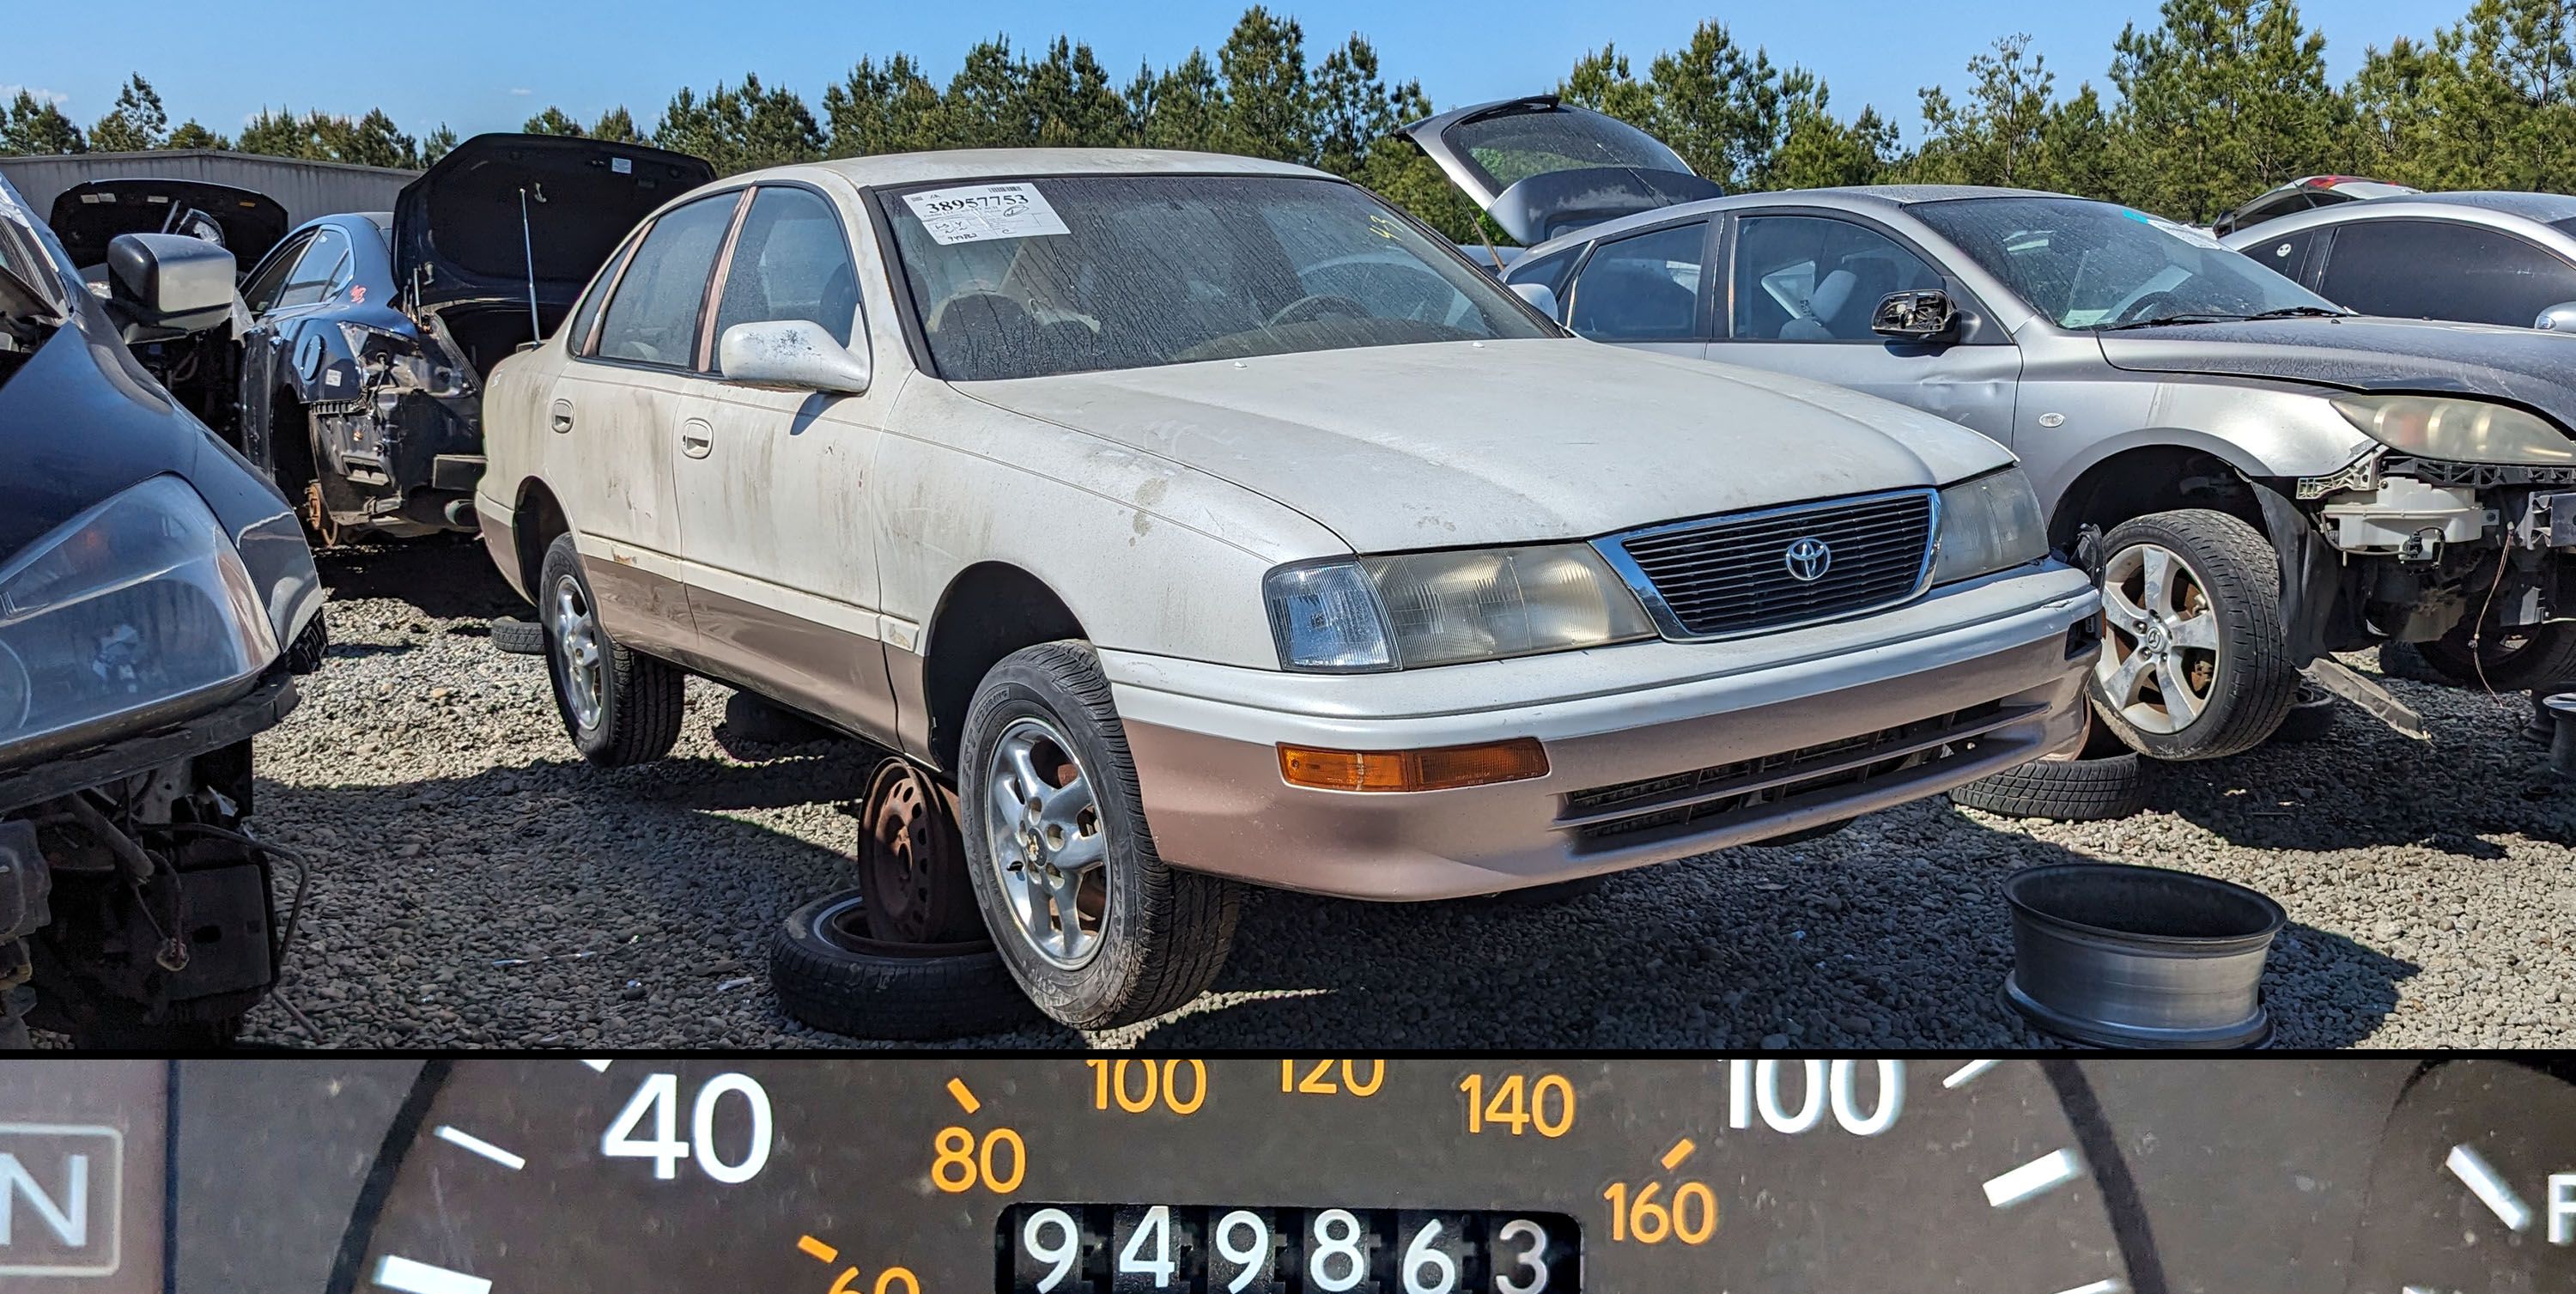 This 1996 Toyota Avalon Drove Nearly a Million Miles during Its Long Life